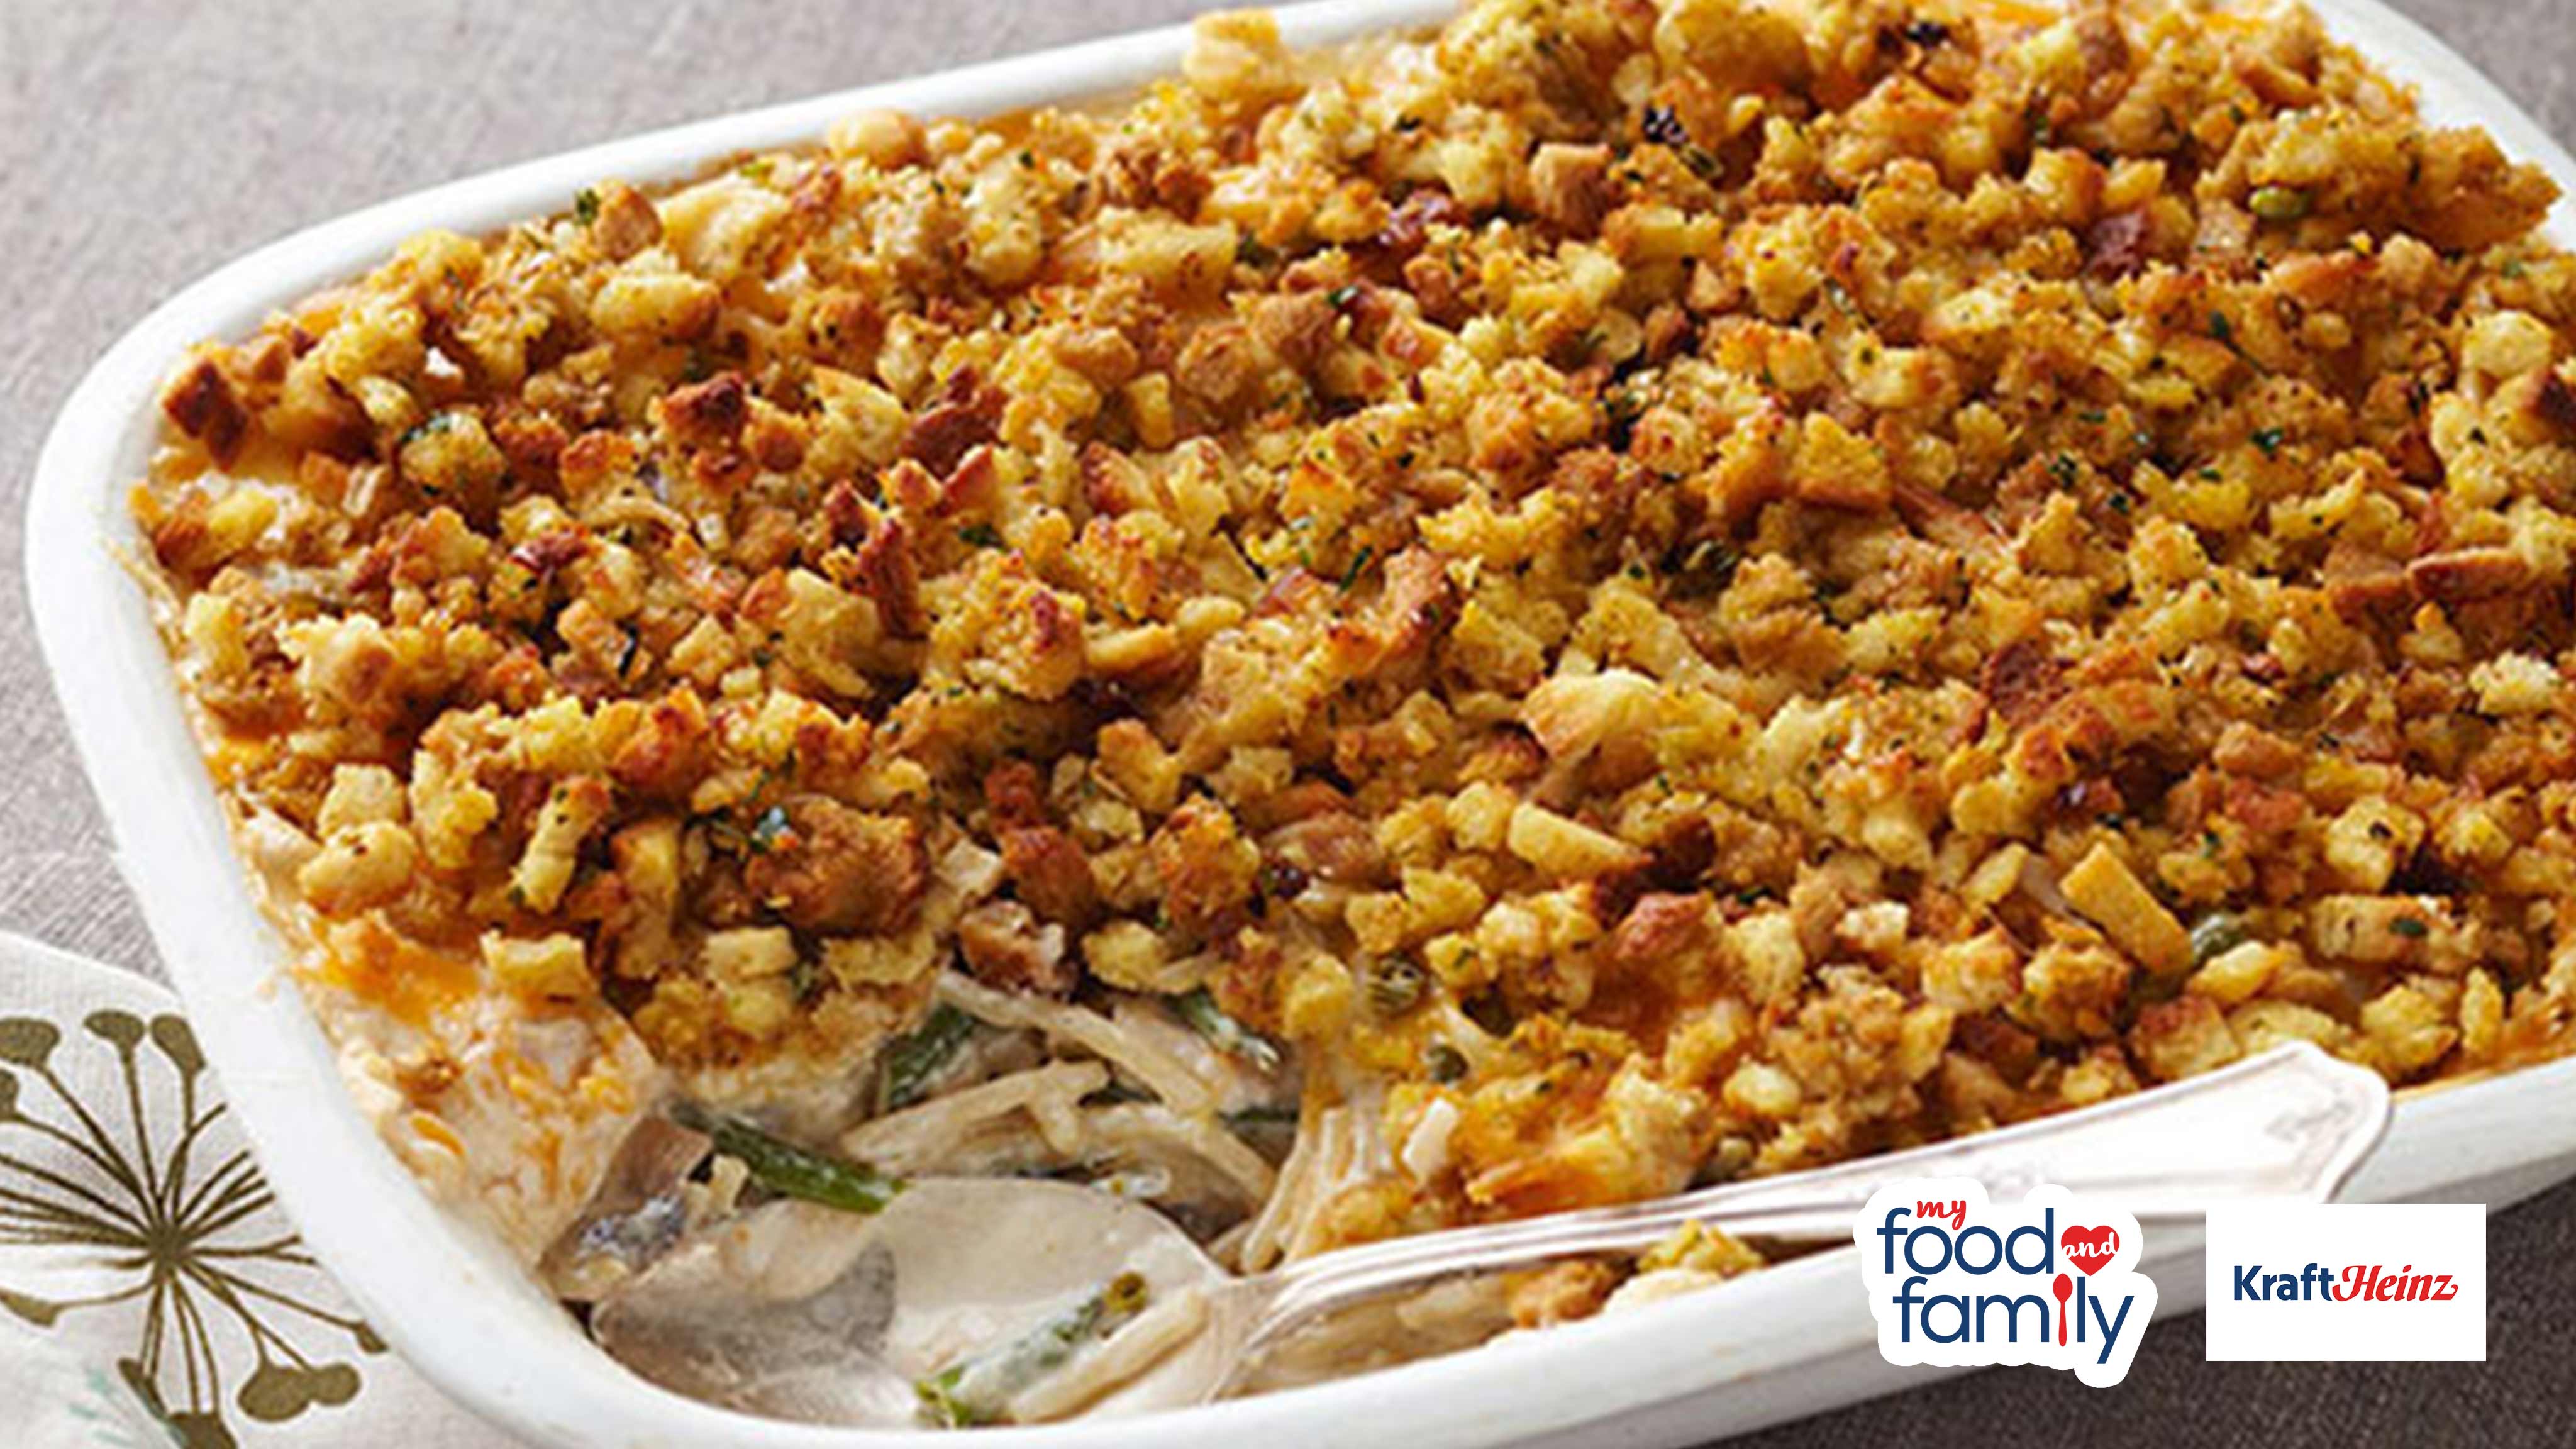 Image for Recipe Creamy Stuffing-Topped Turkey